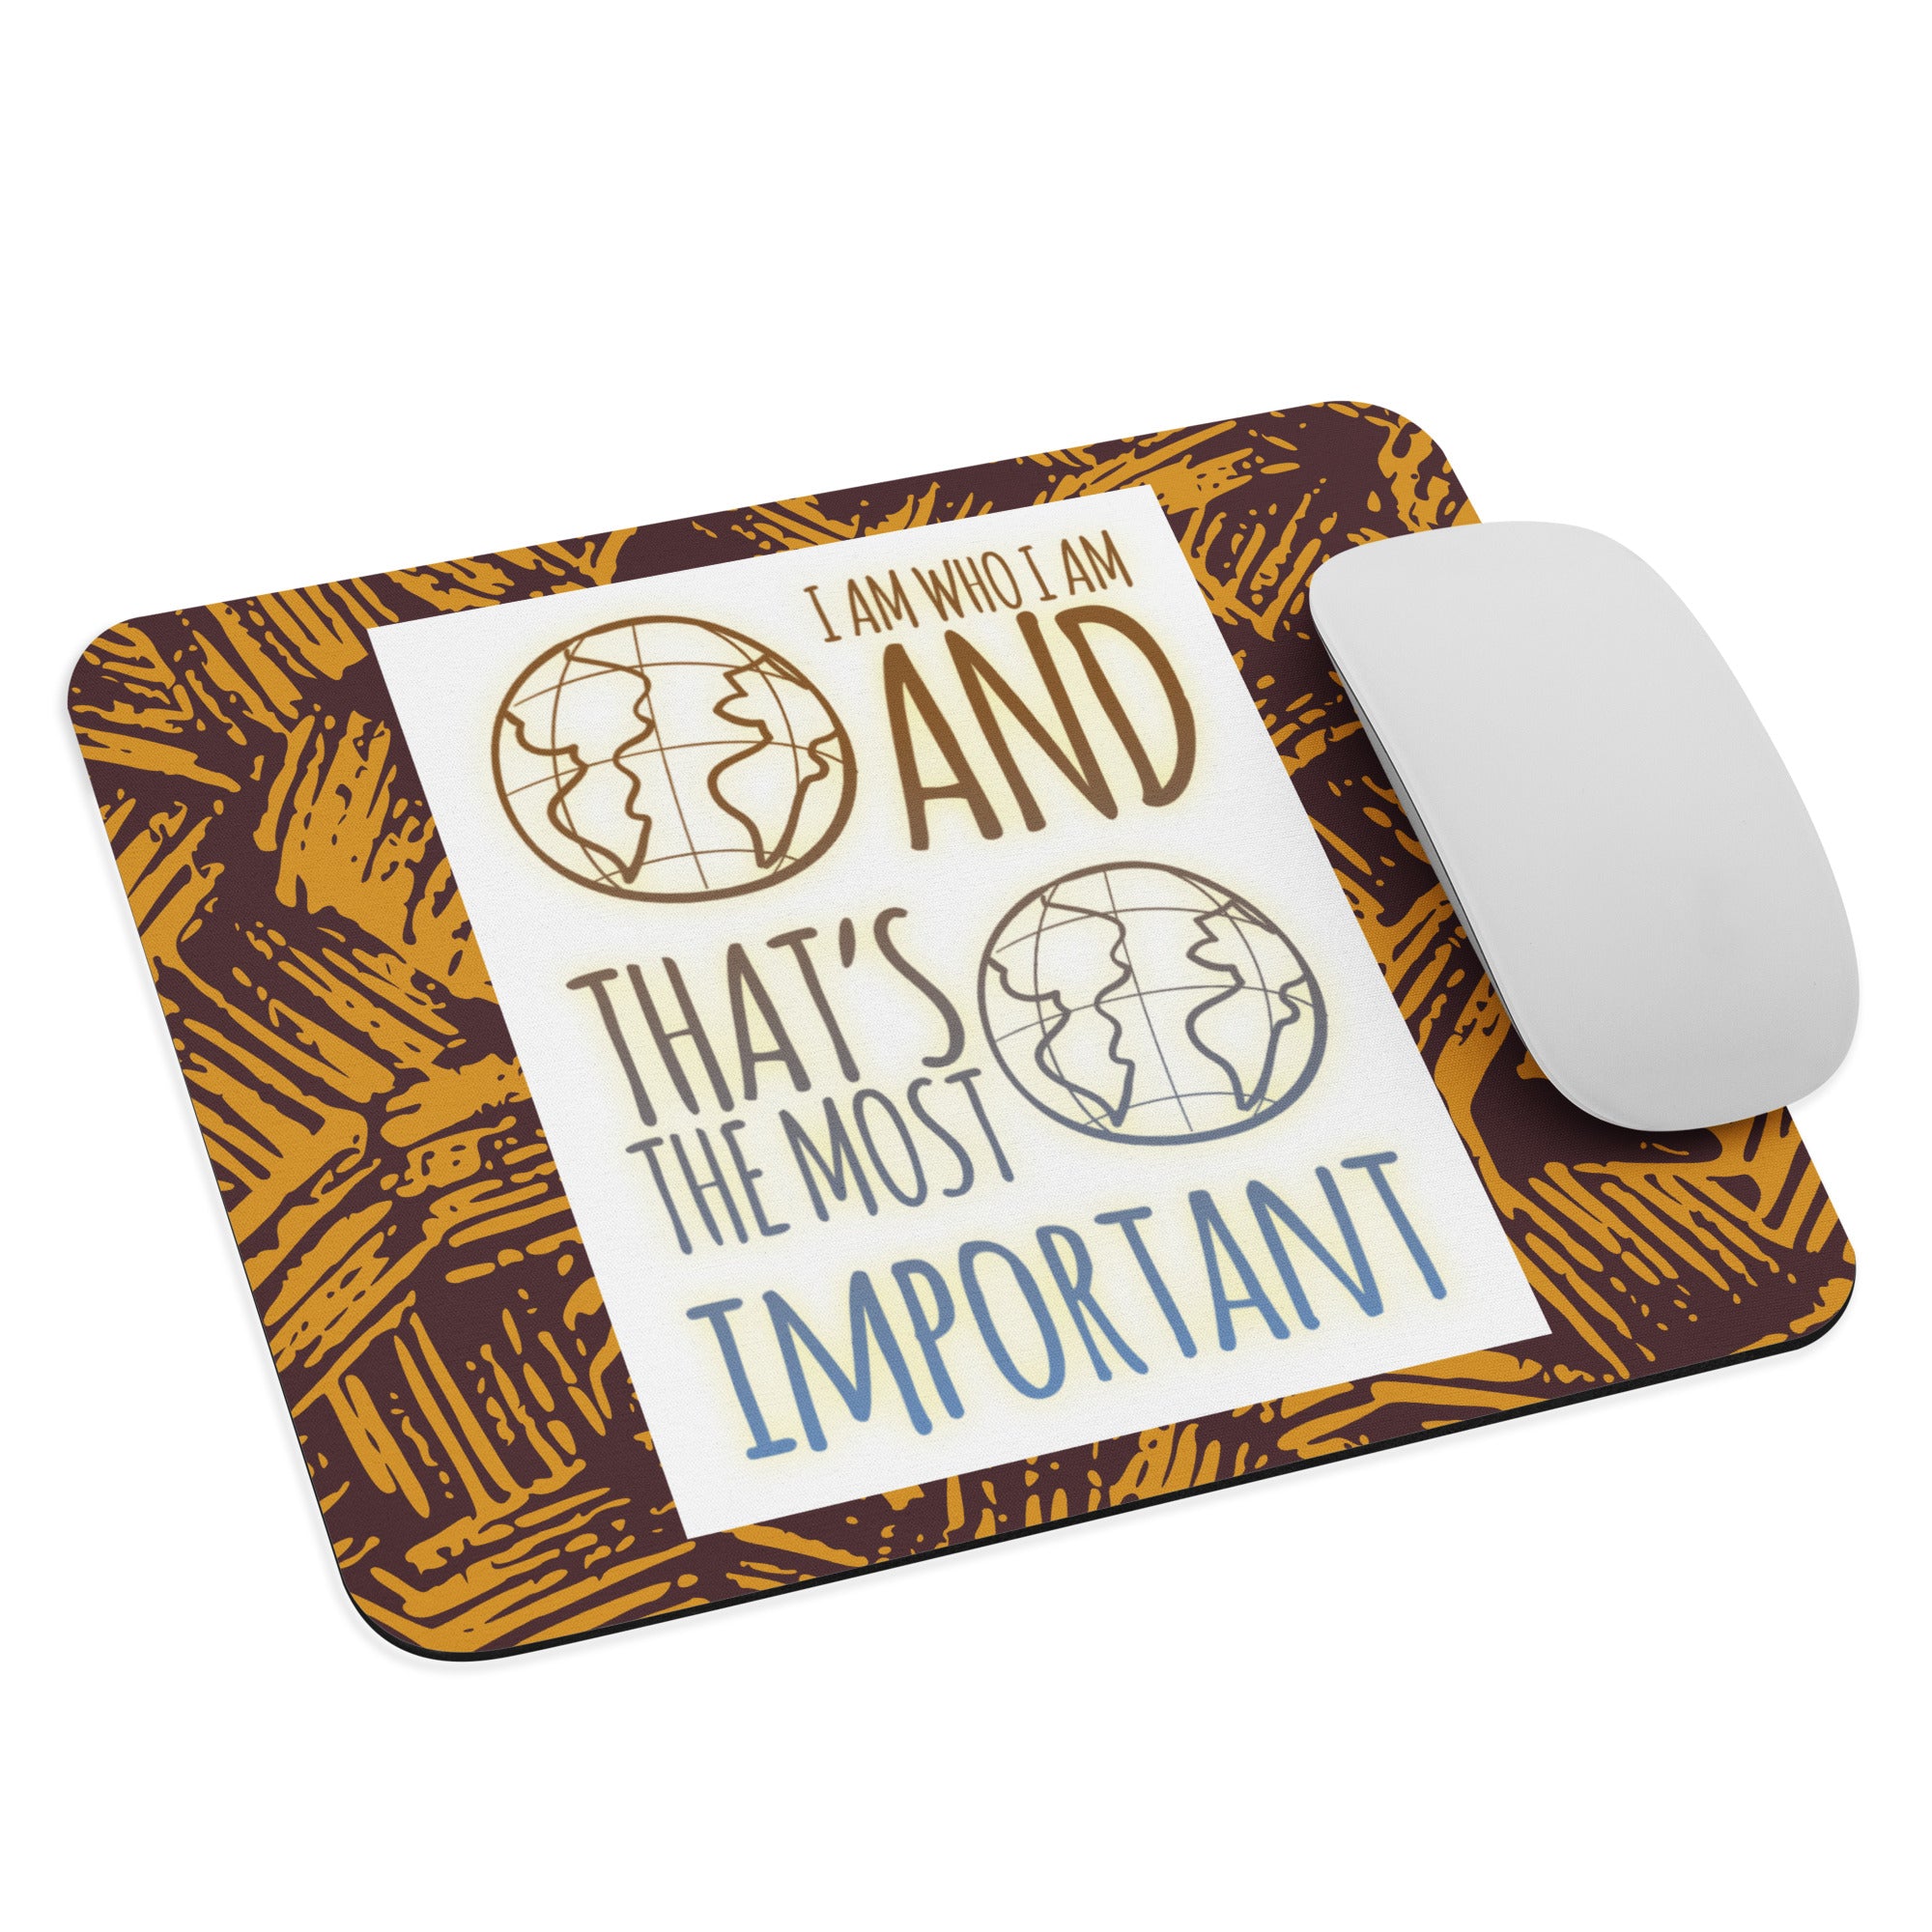 GloWell Designs - Mouse Pad - Affirmation Quote - I Am Who I Am - GloWell Designs